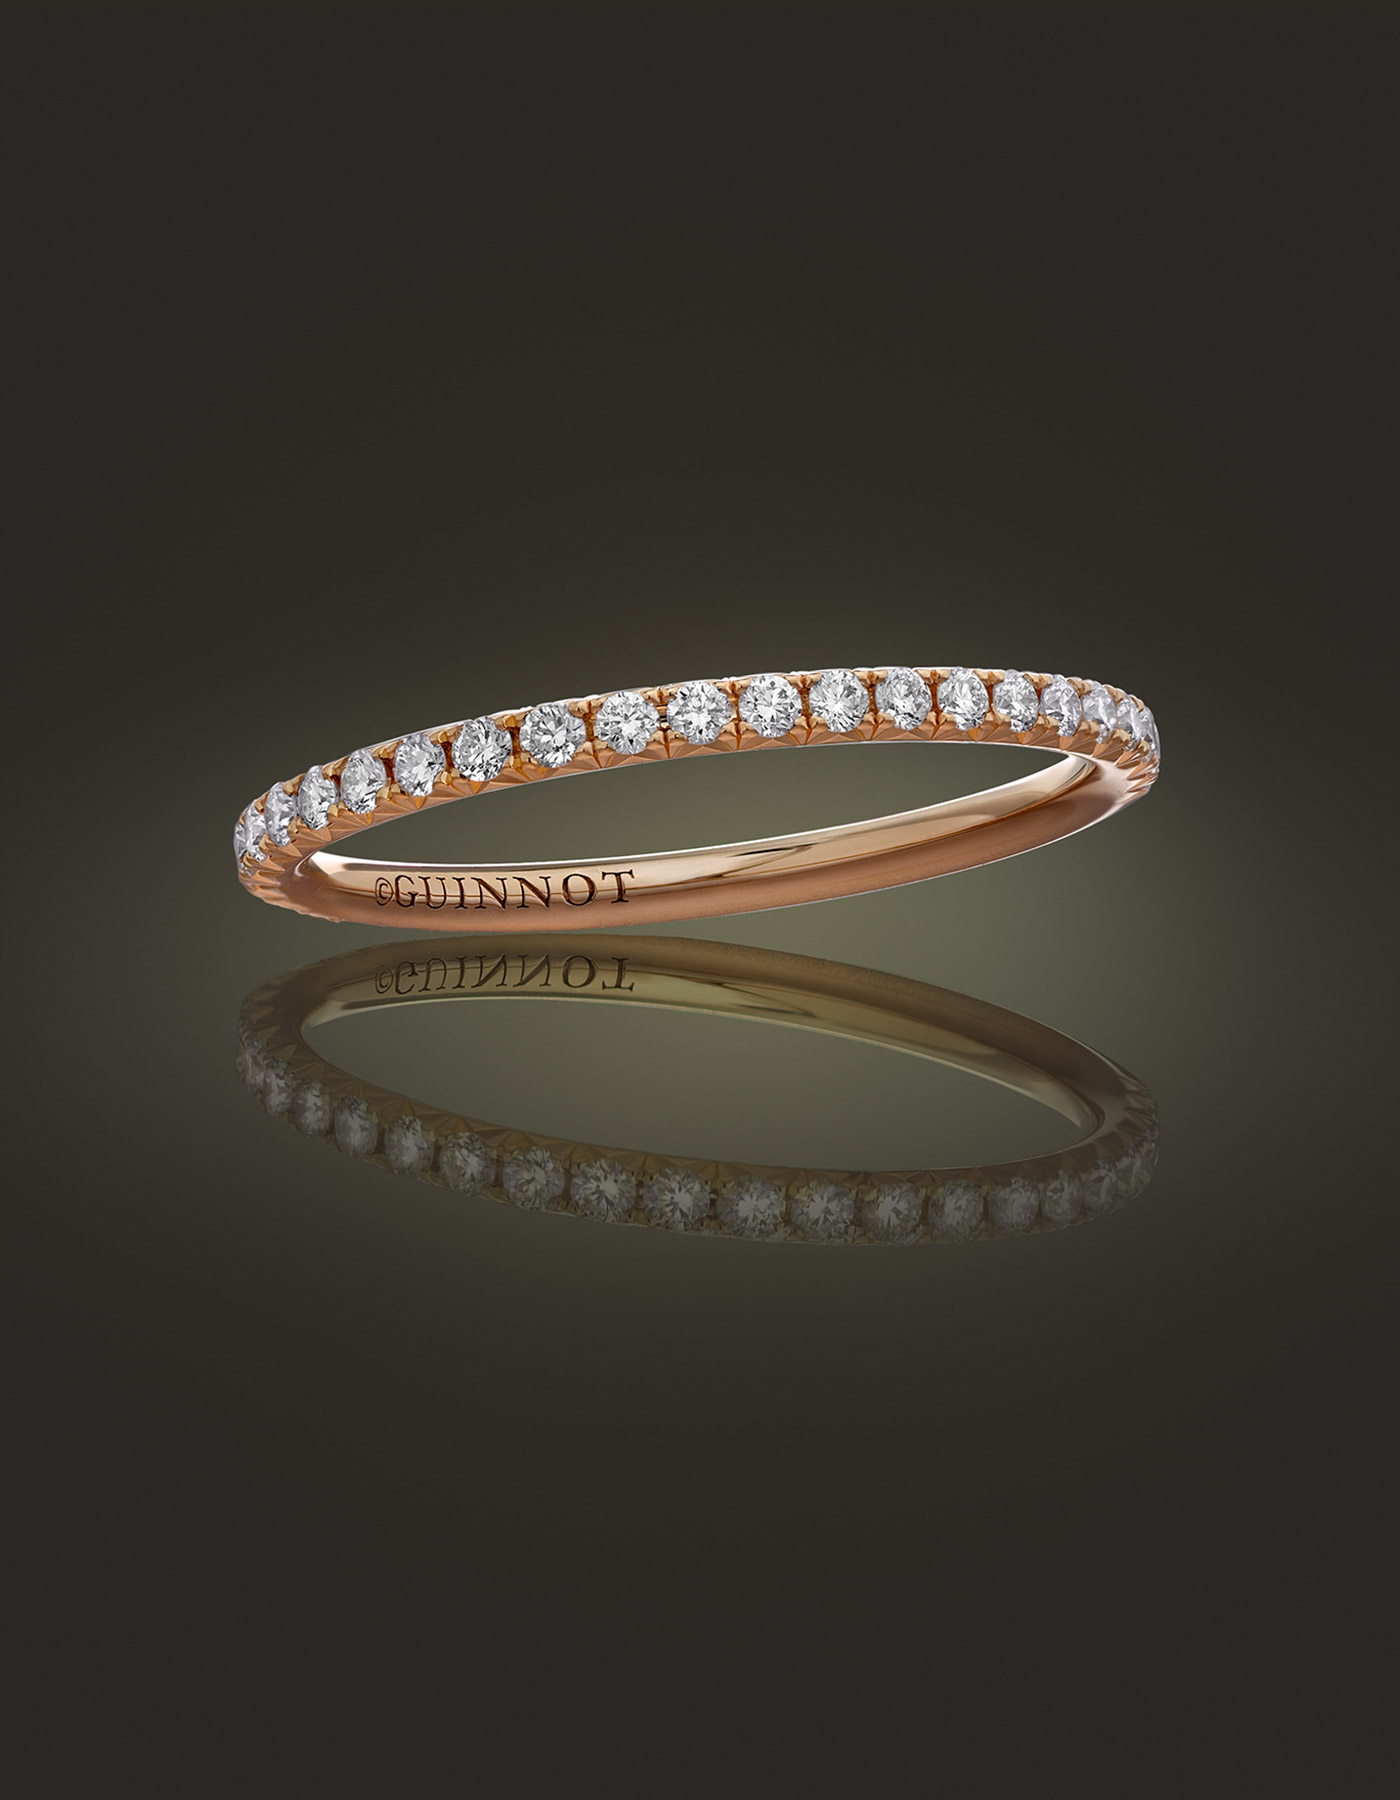 Guinnot Anonymous Diamond microband eternity ring in 18k rose gold